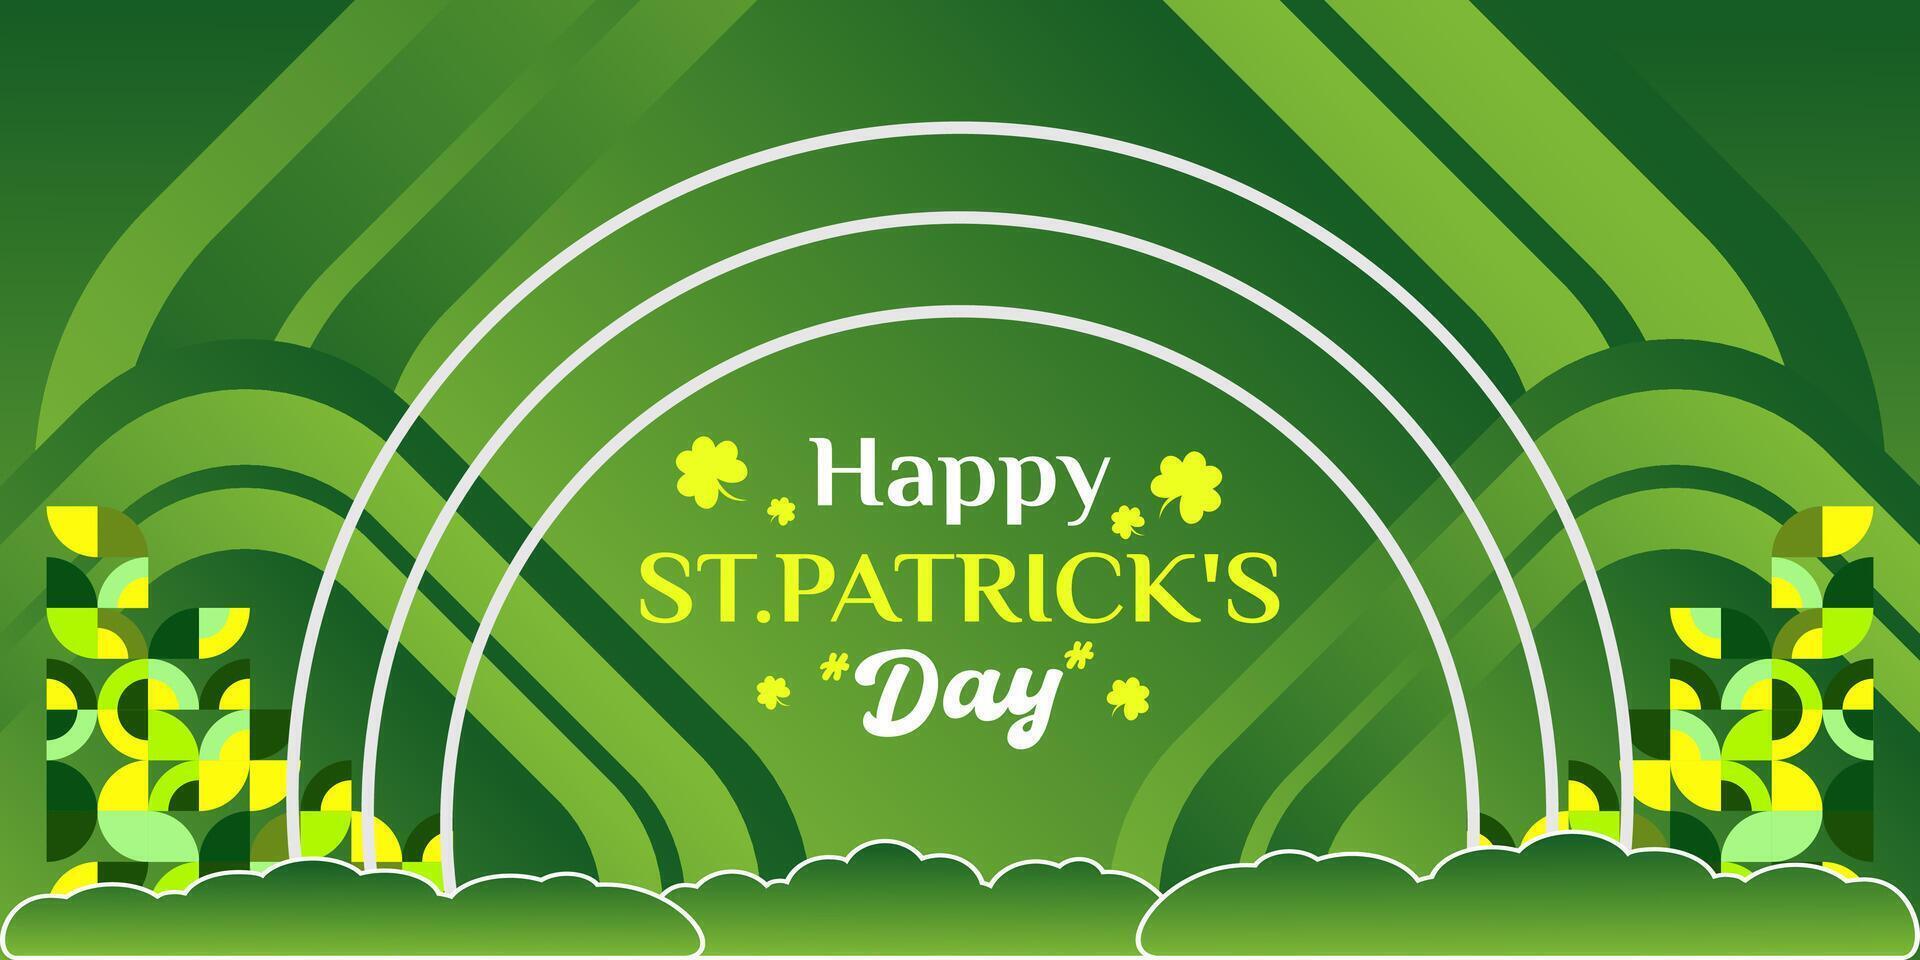 Happy St Patrick's Day banner in modern geometric style. Great for greeting covers, social posters and St Patrick's Day celebration party invitations with text. Vector illustration